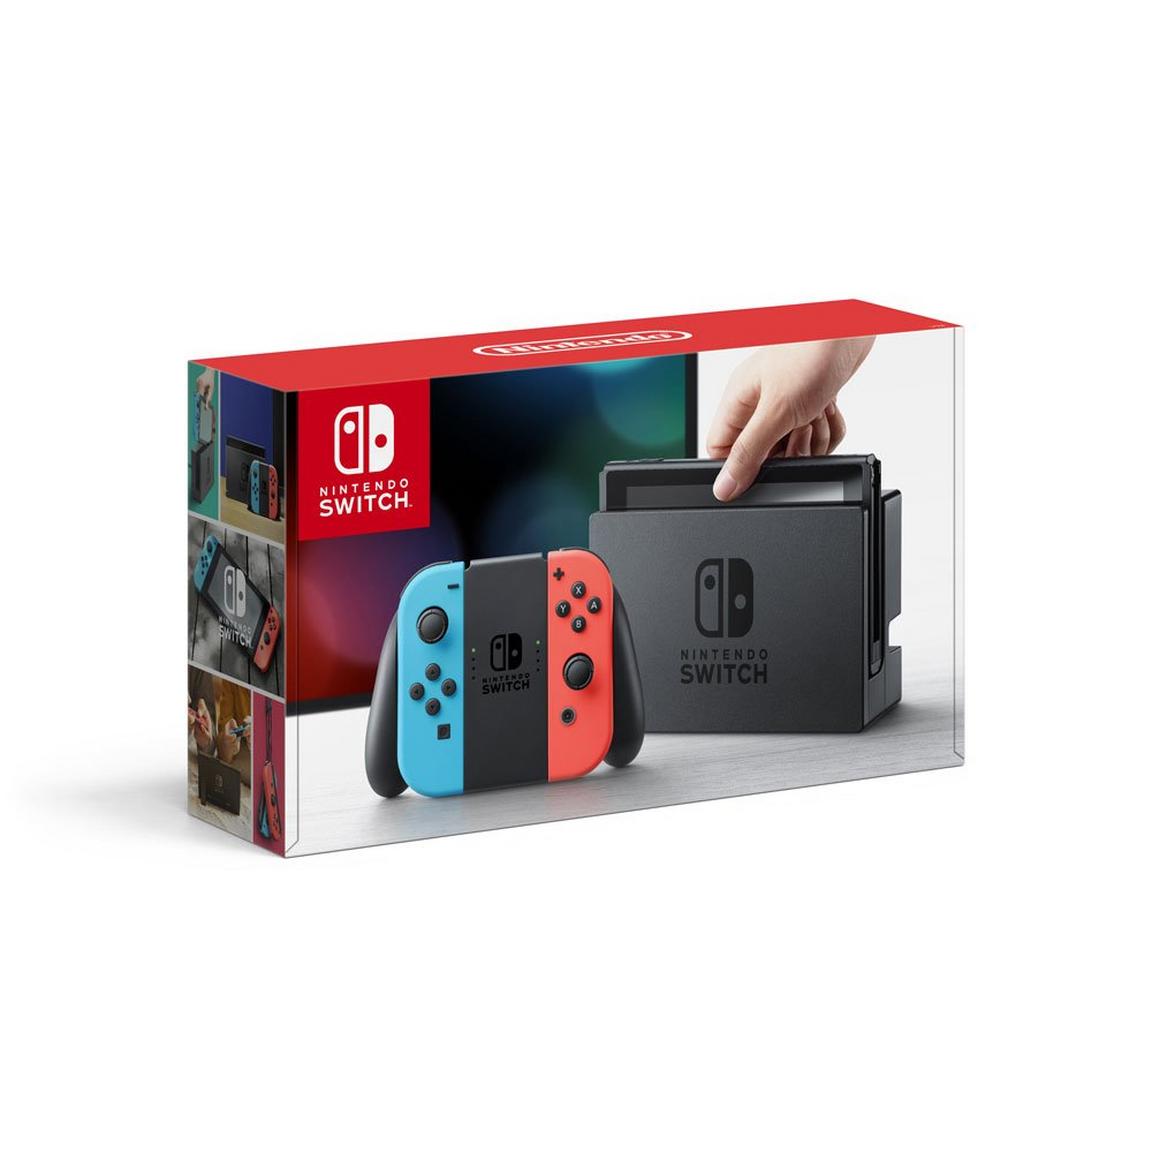 Nintendo Switch Console with Joy-Con Controller, Neon/Blueneon/Red